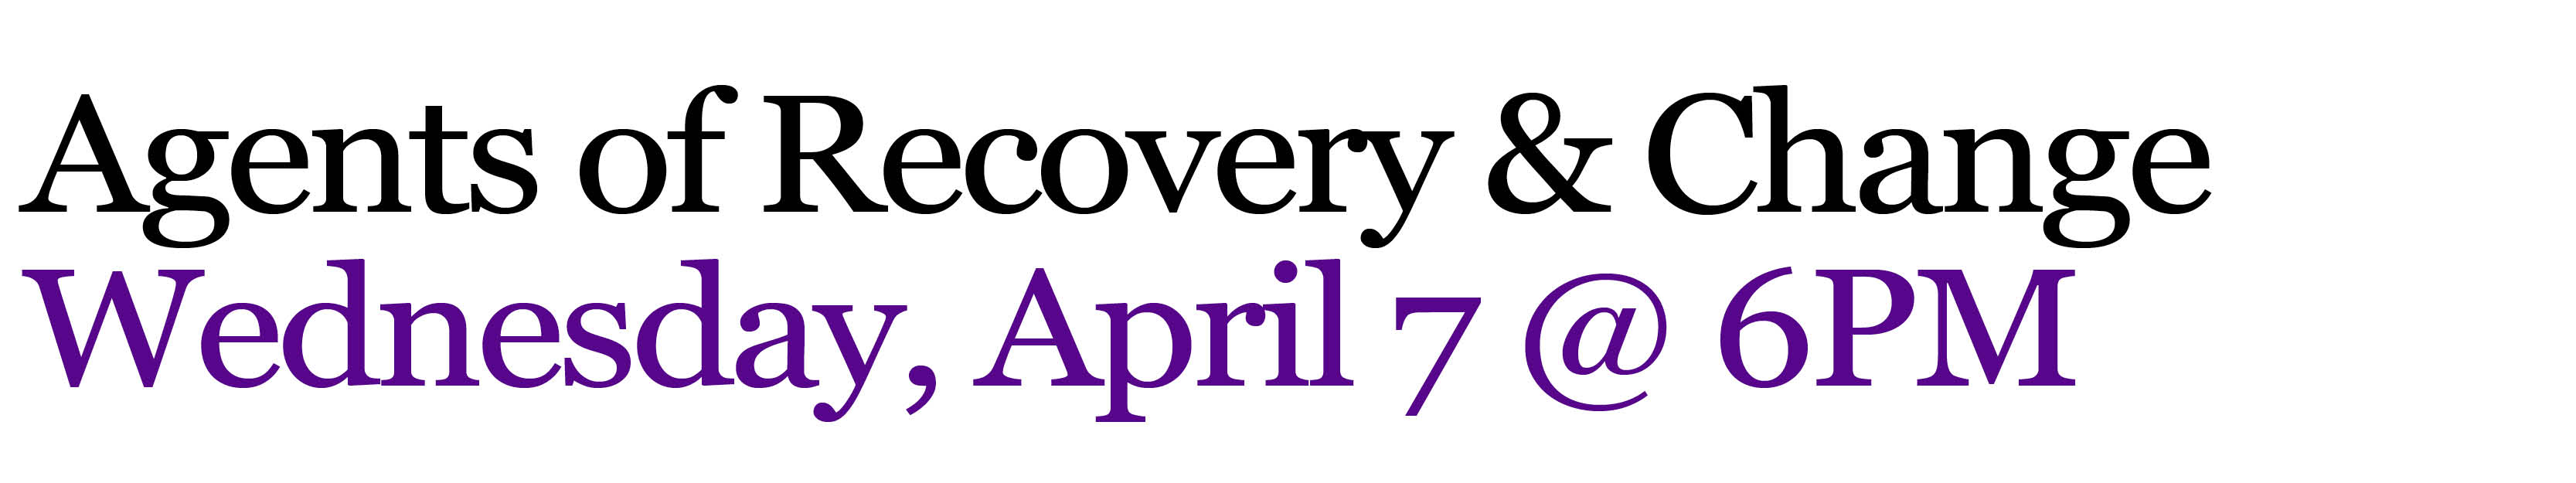 Agents of Recovery & Change Wednesday, April 7 @ 6pm